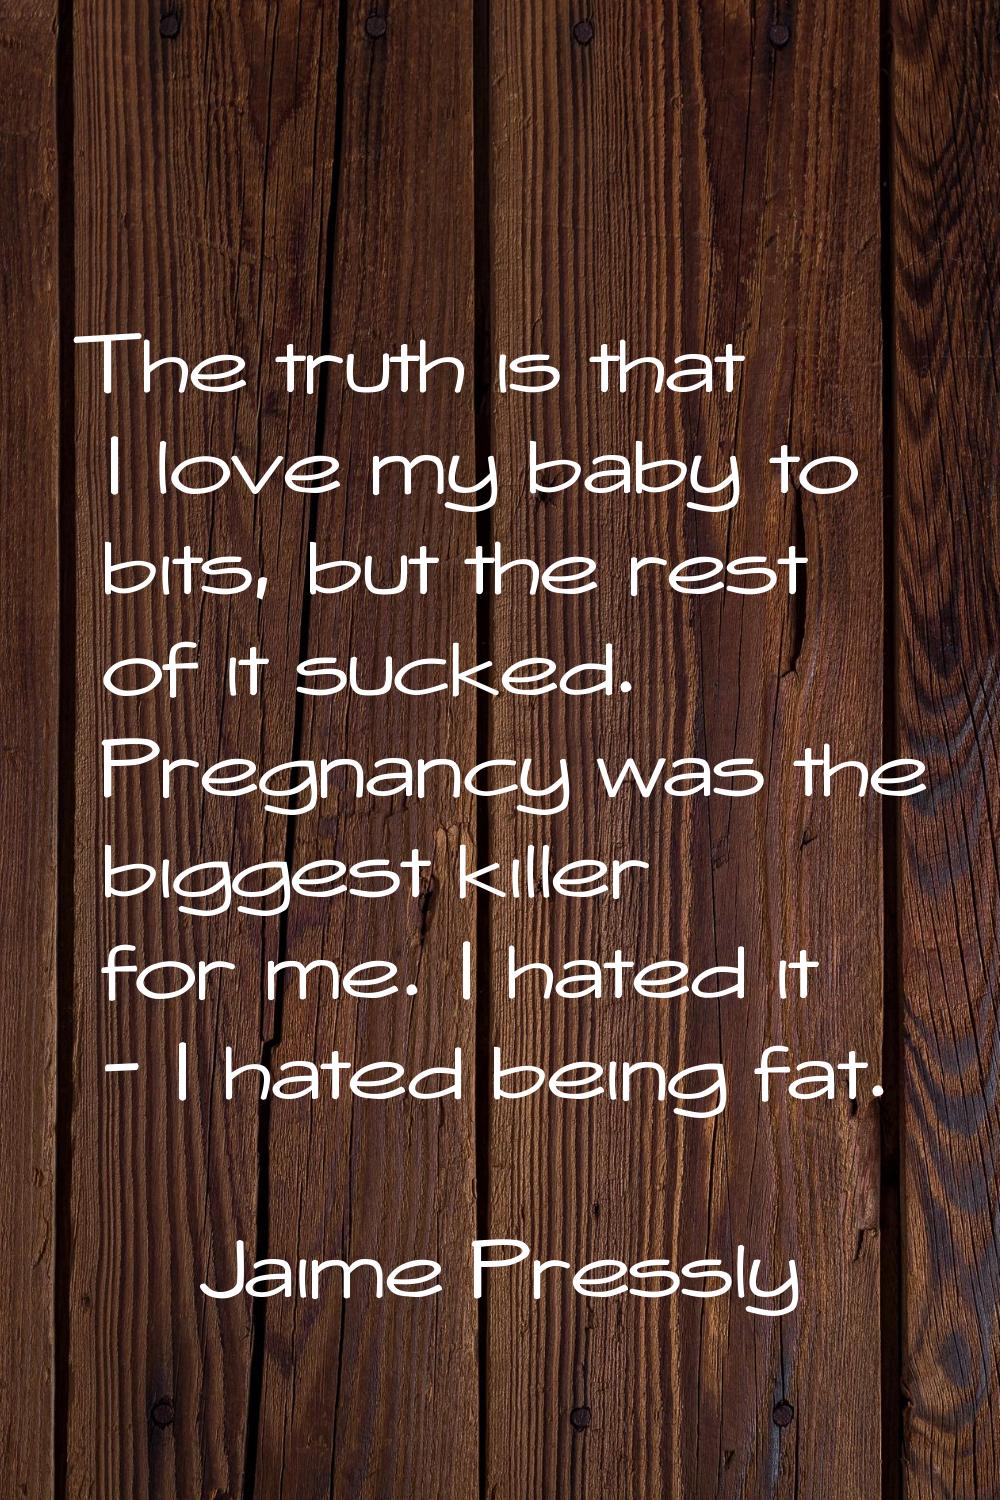 The truth is that I love my baby to bits, but the rest of it sucked. Pregnancy was the biggest kill